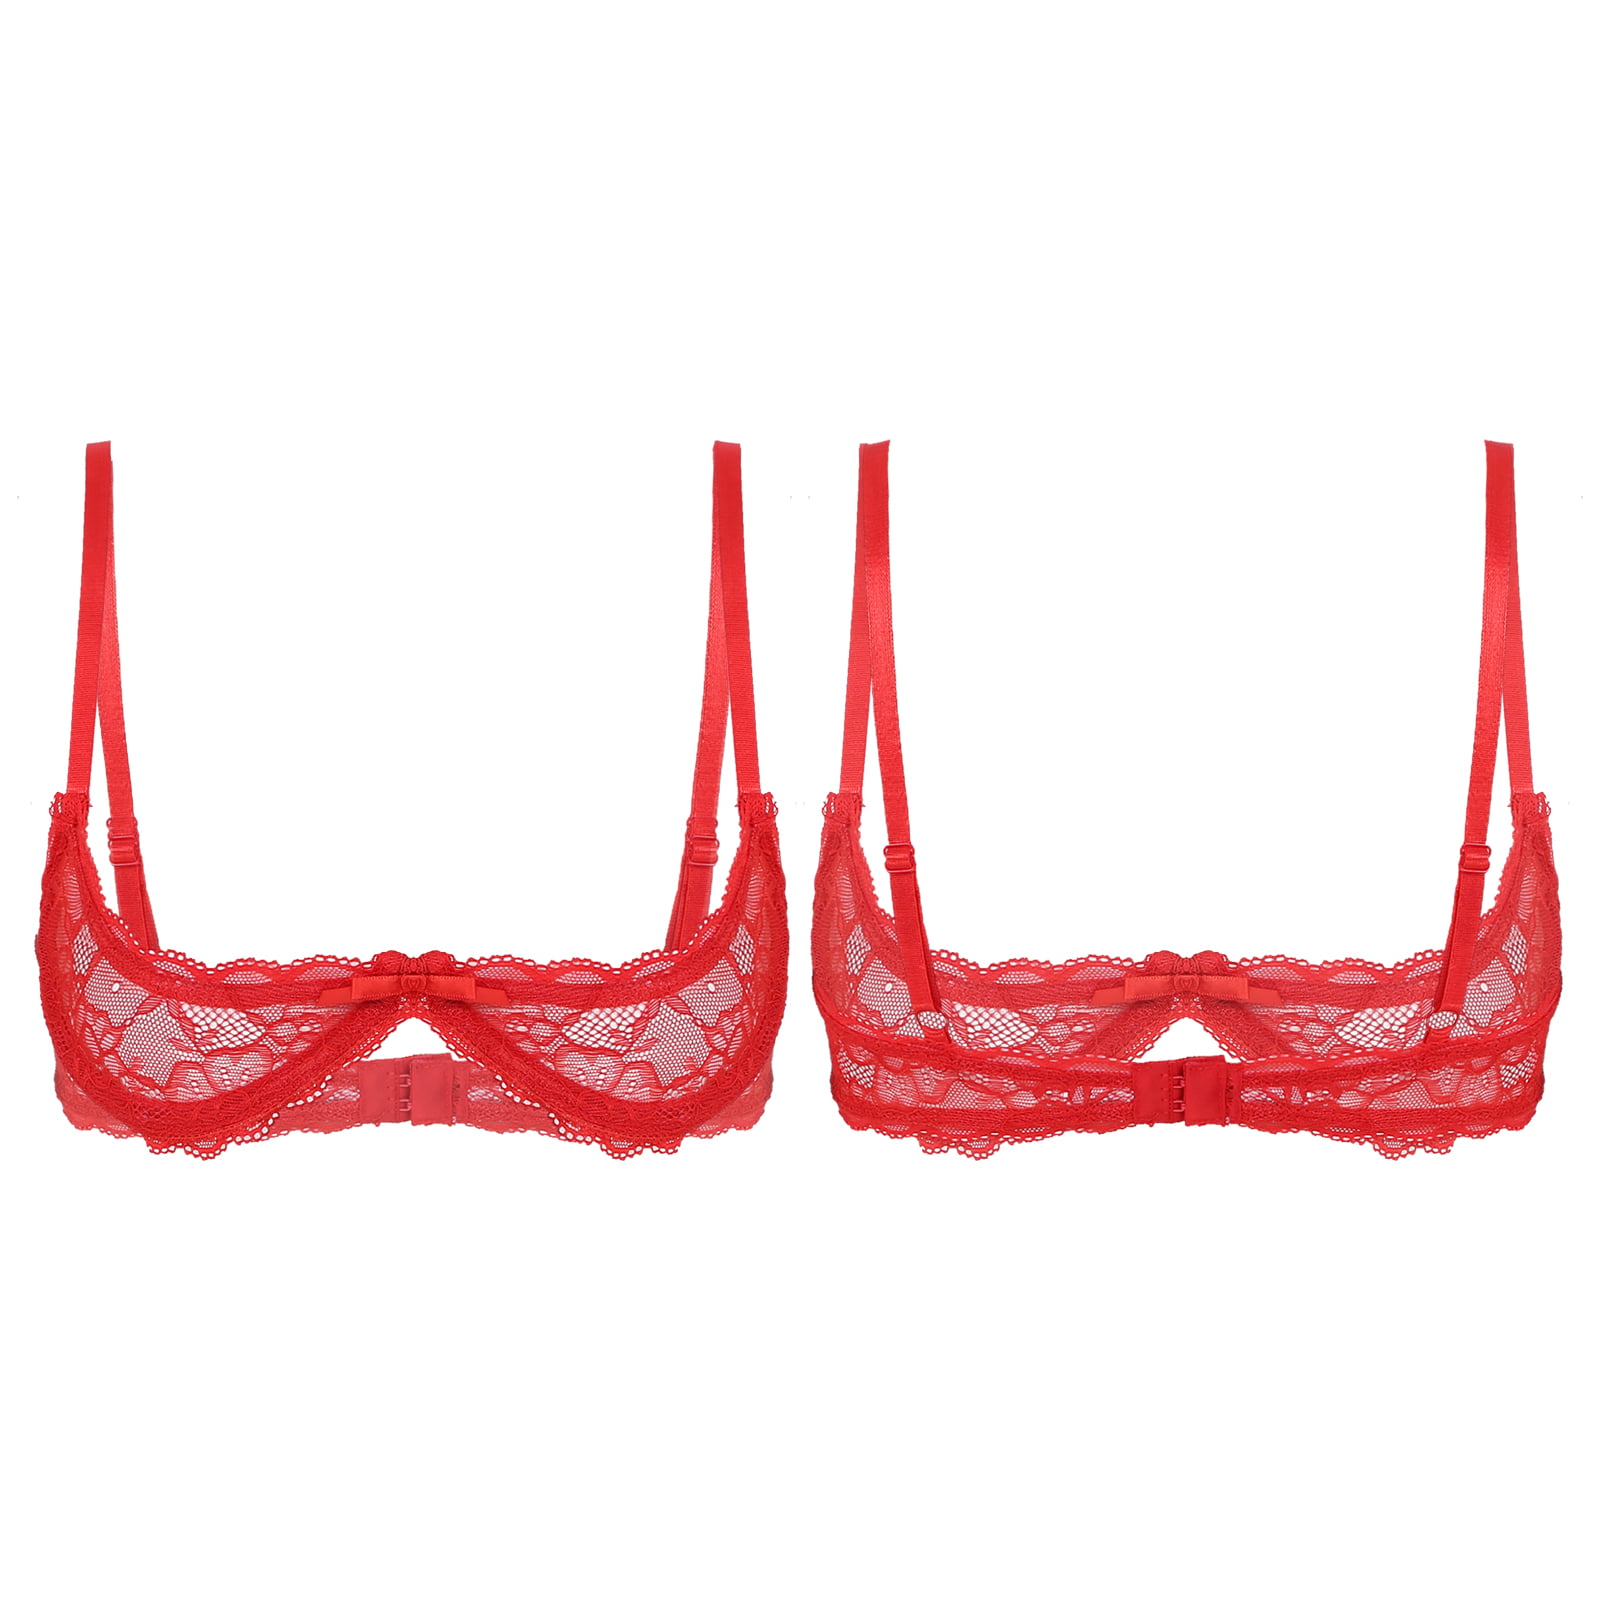 DPOIS Women's Lace 1/4 Cups Bra Halter Neck O Ring Underwire Red XL